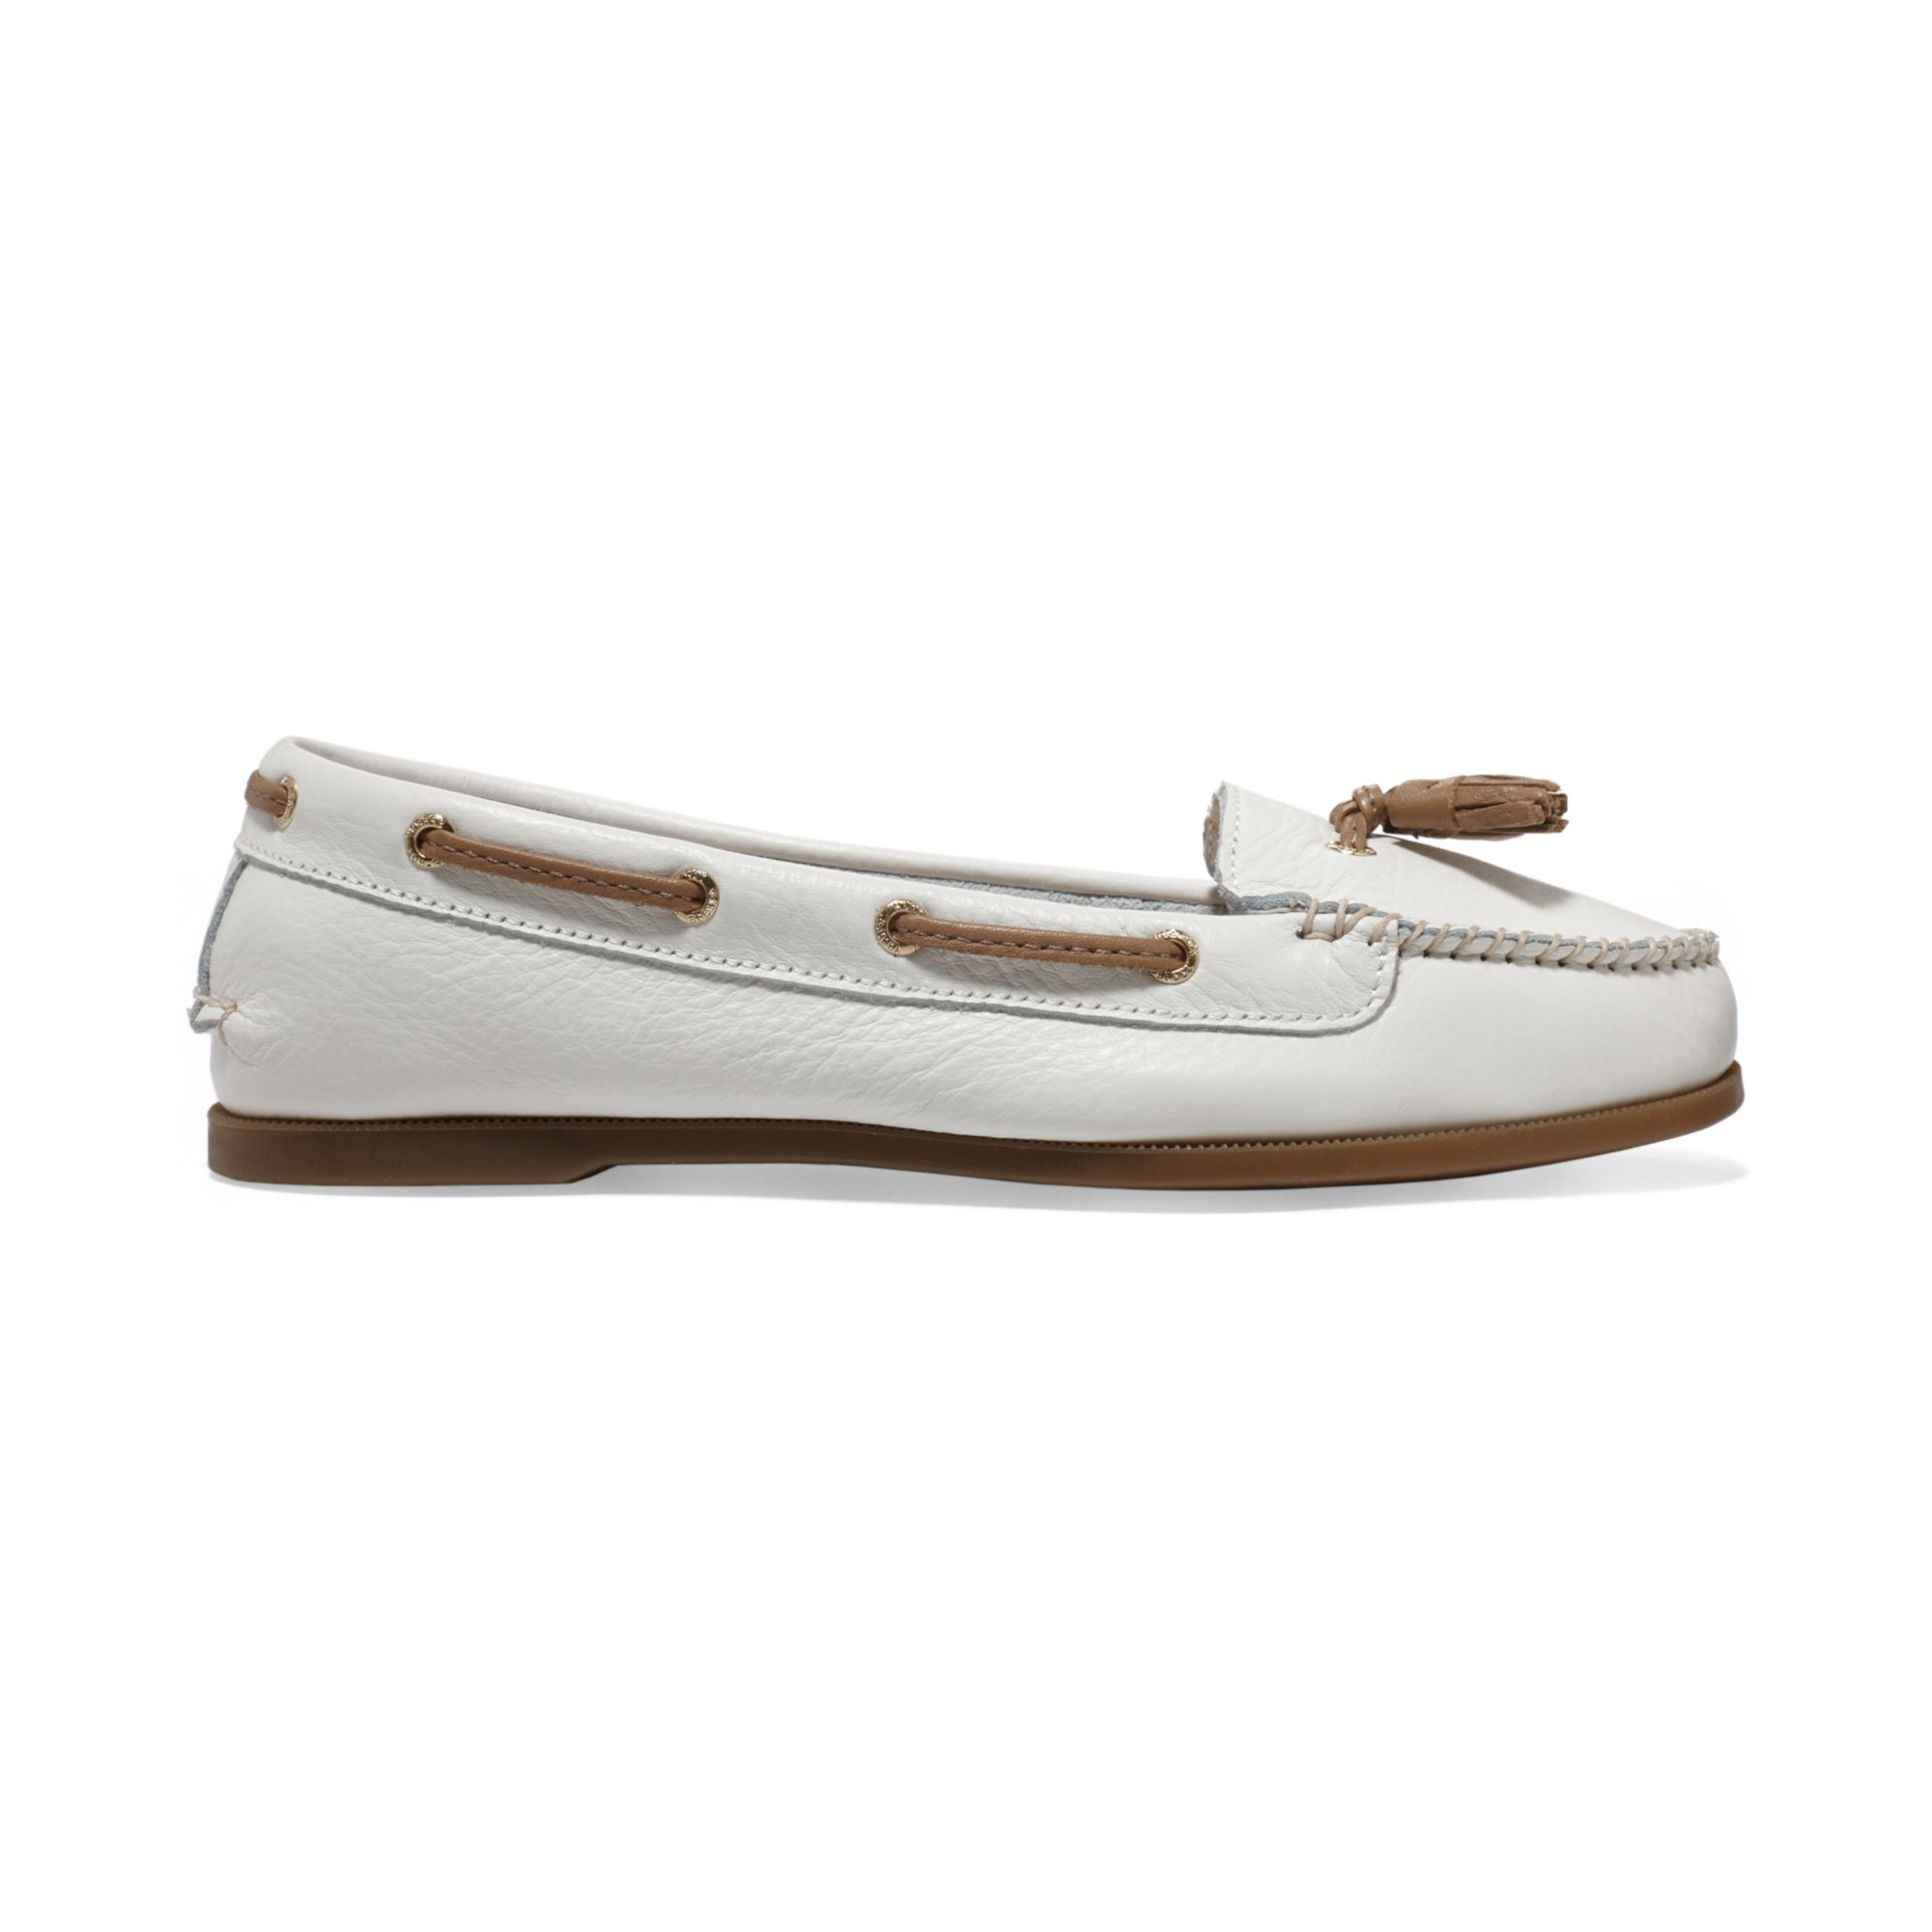 Sperry Top-sider Sperry Topside Womens Sabrina Moccasins in White ...